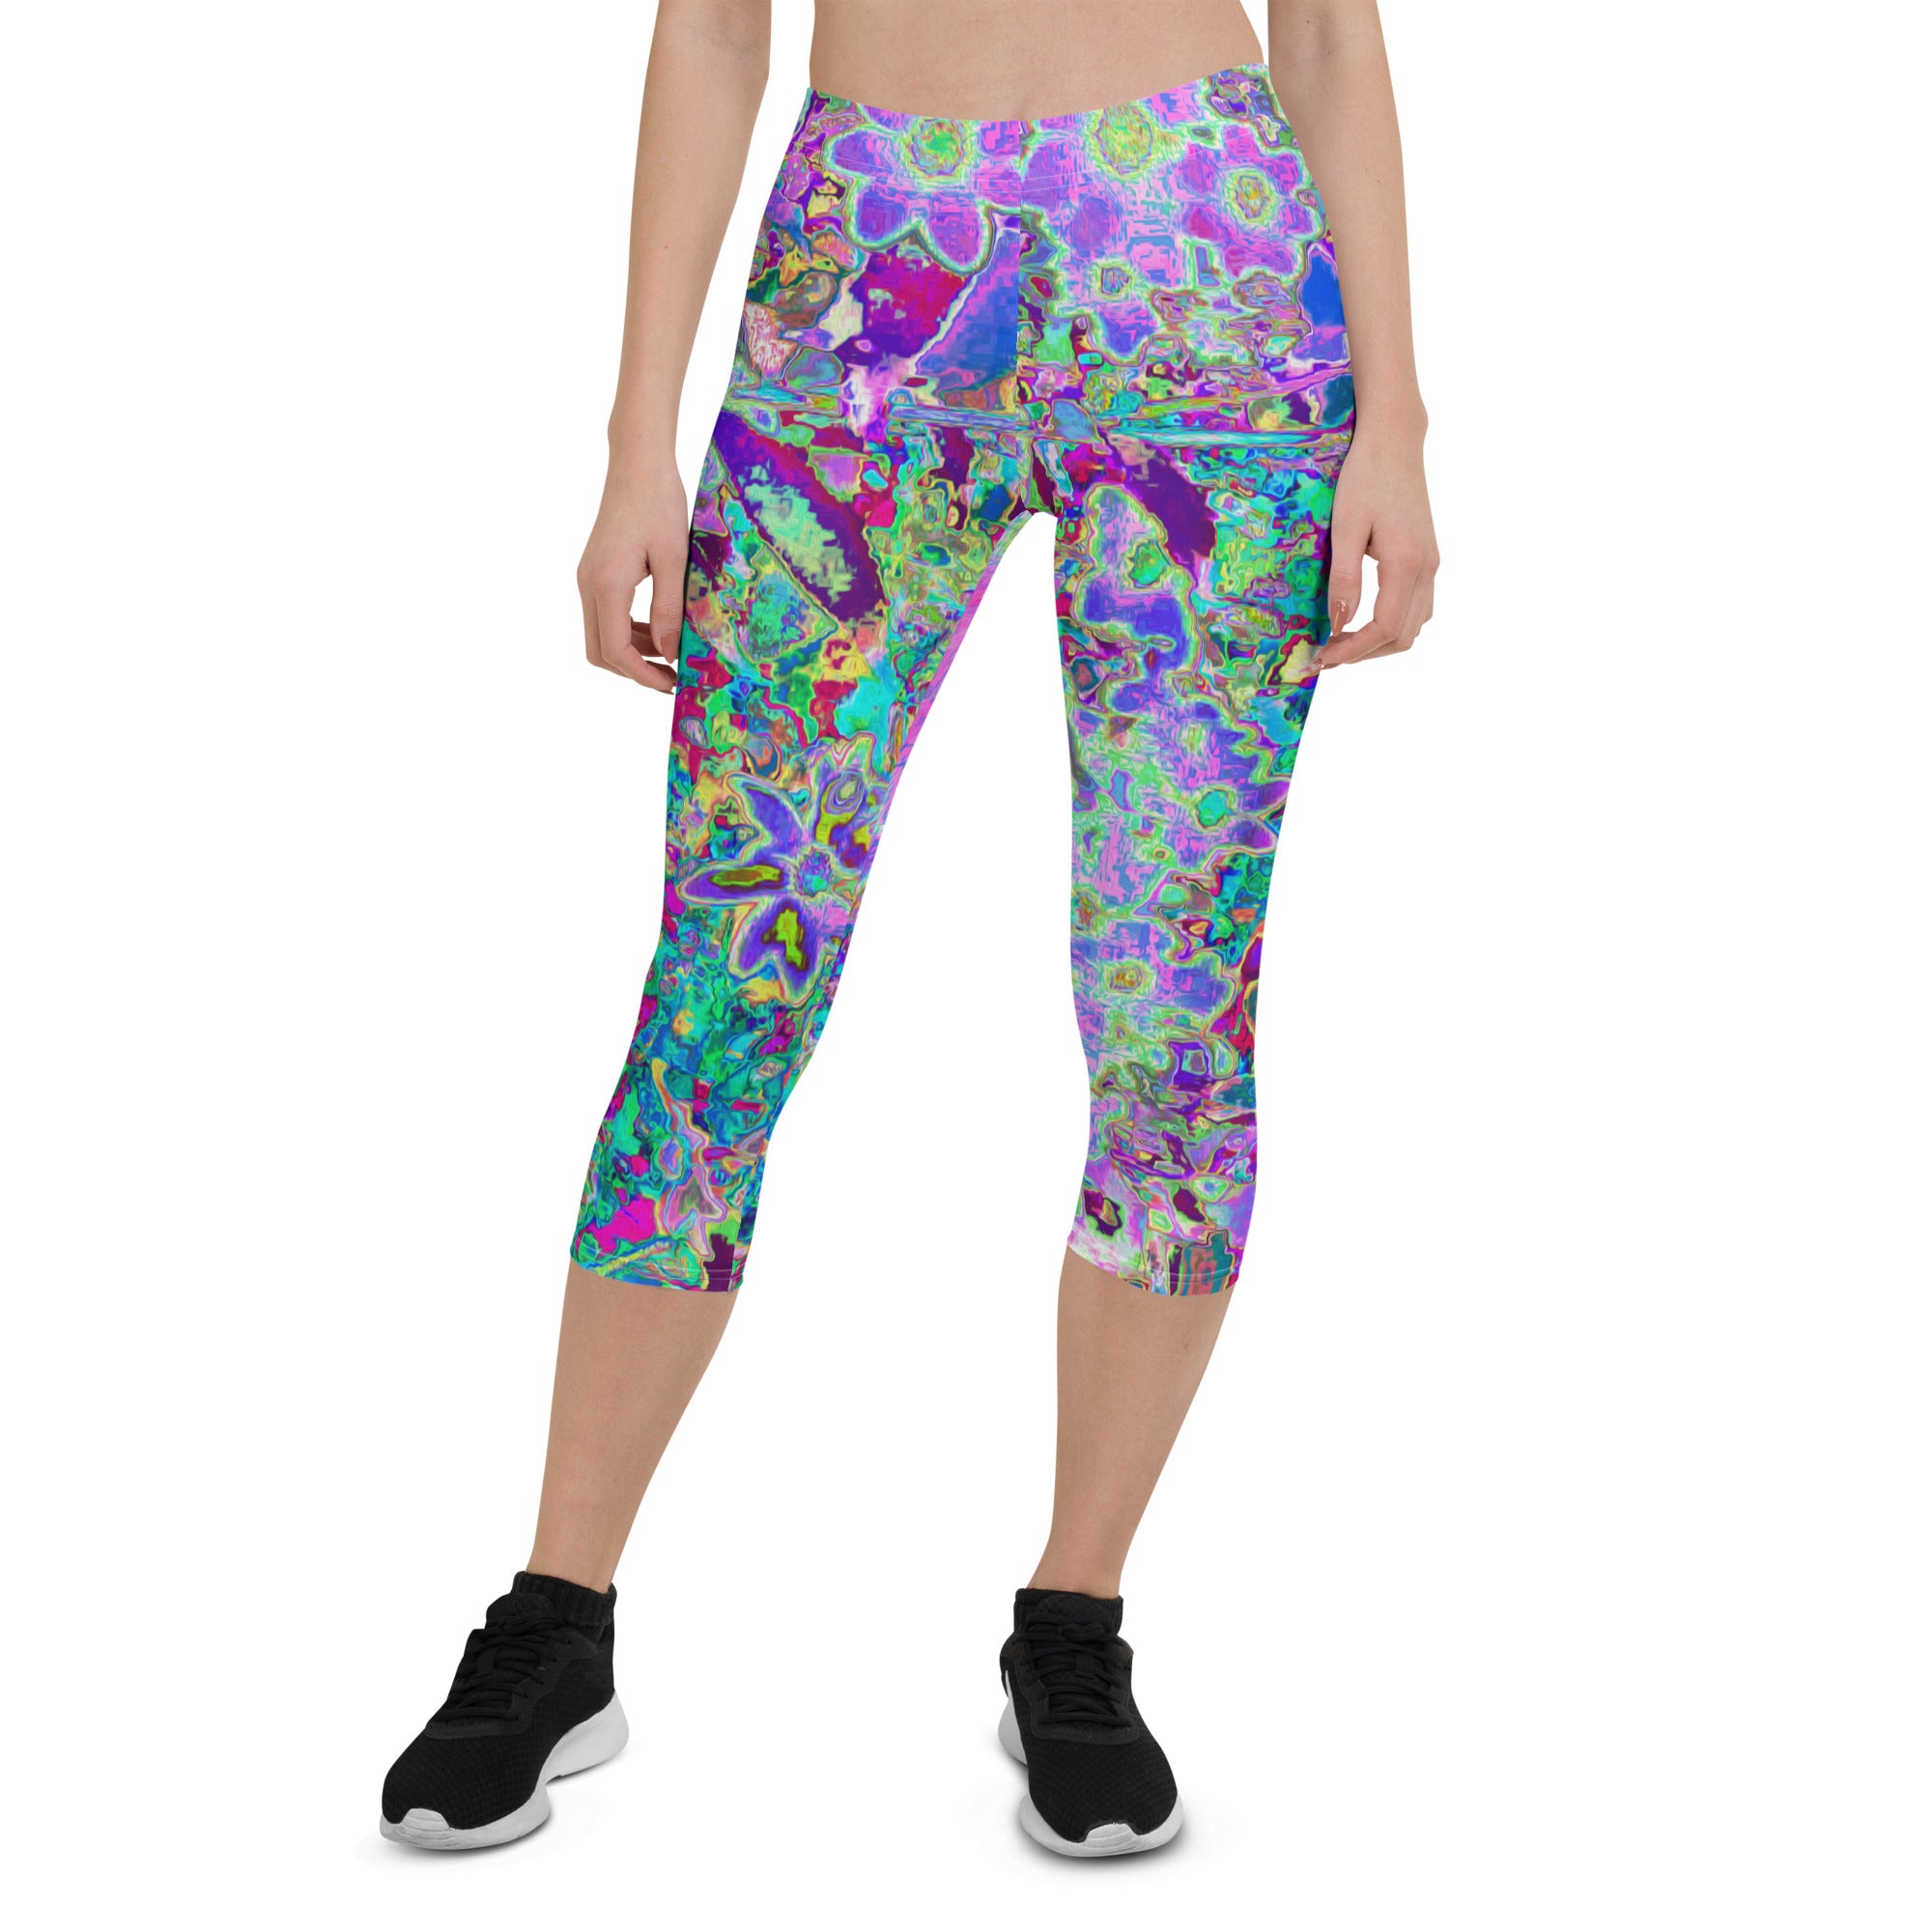 Capri Leggings for Women, Trippy Abstract Pink and Purple Flowers